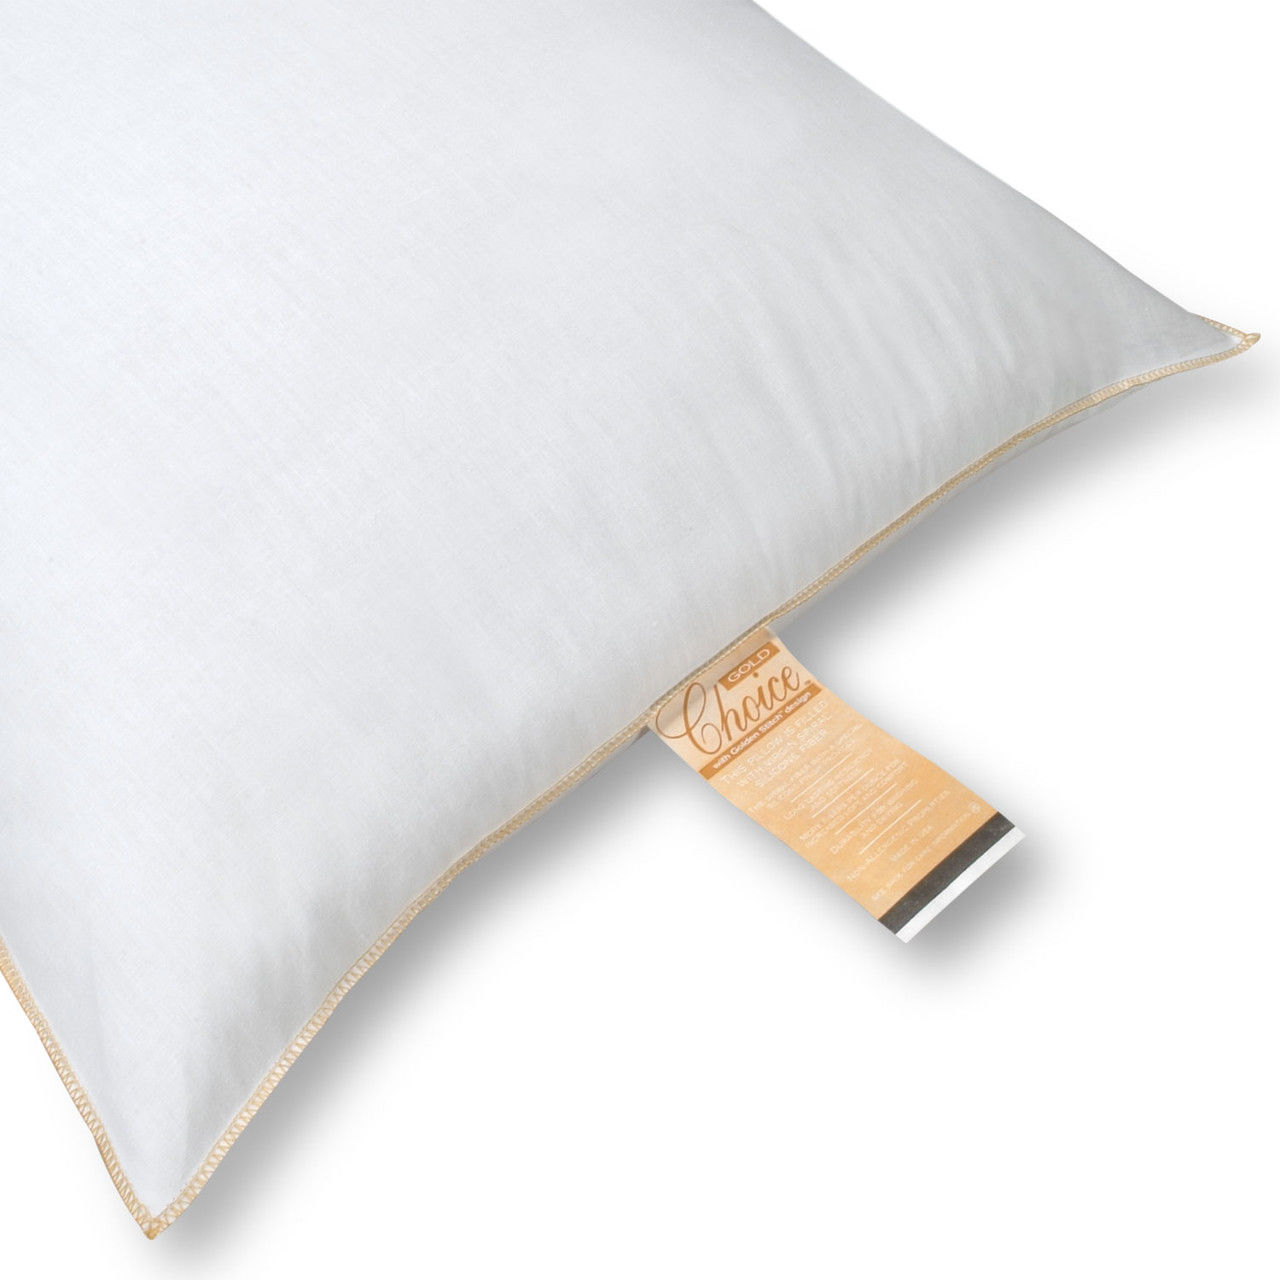 What features are included in the premium Gold Choice Pillows?